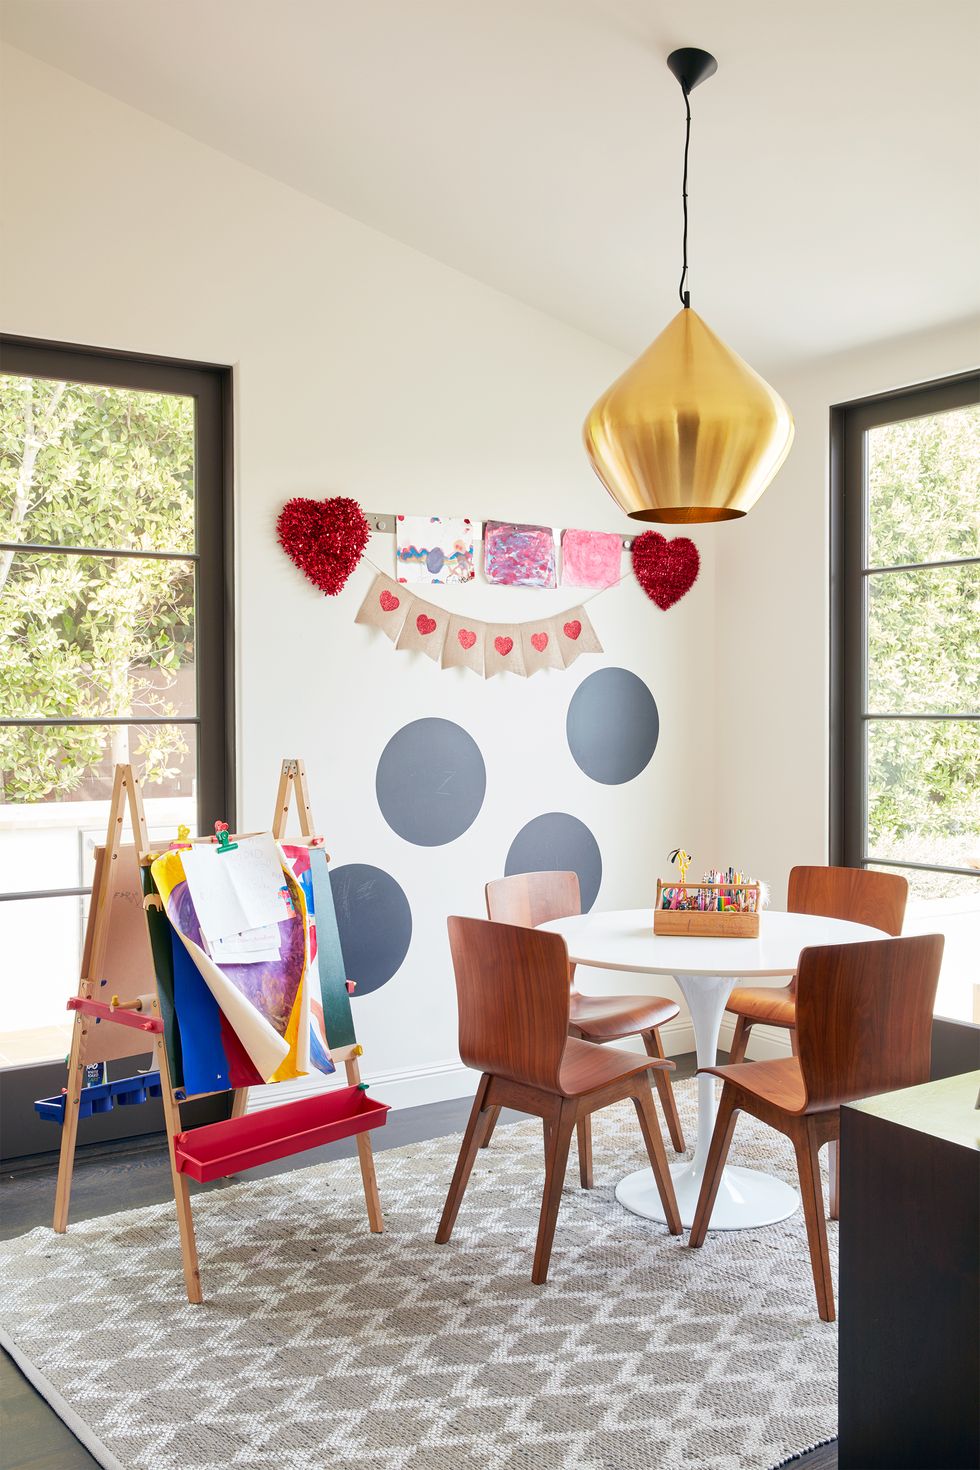 12 Craft Room Ideas That Blend Form and Function